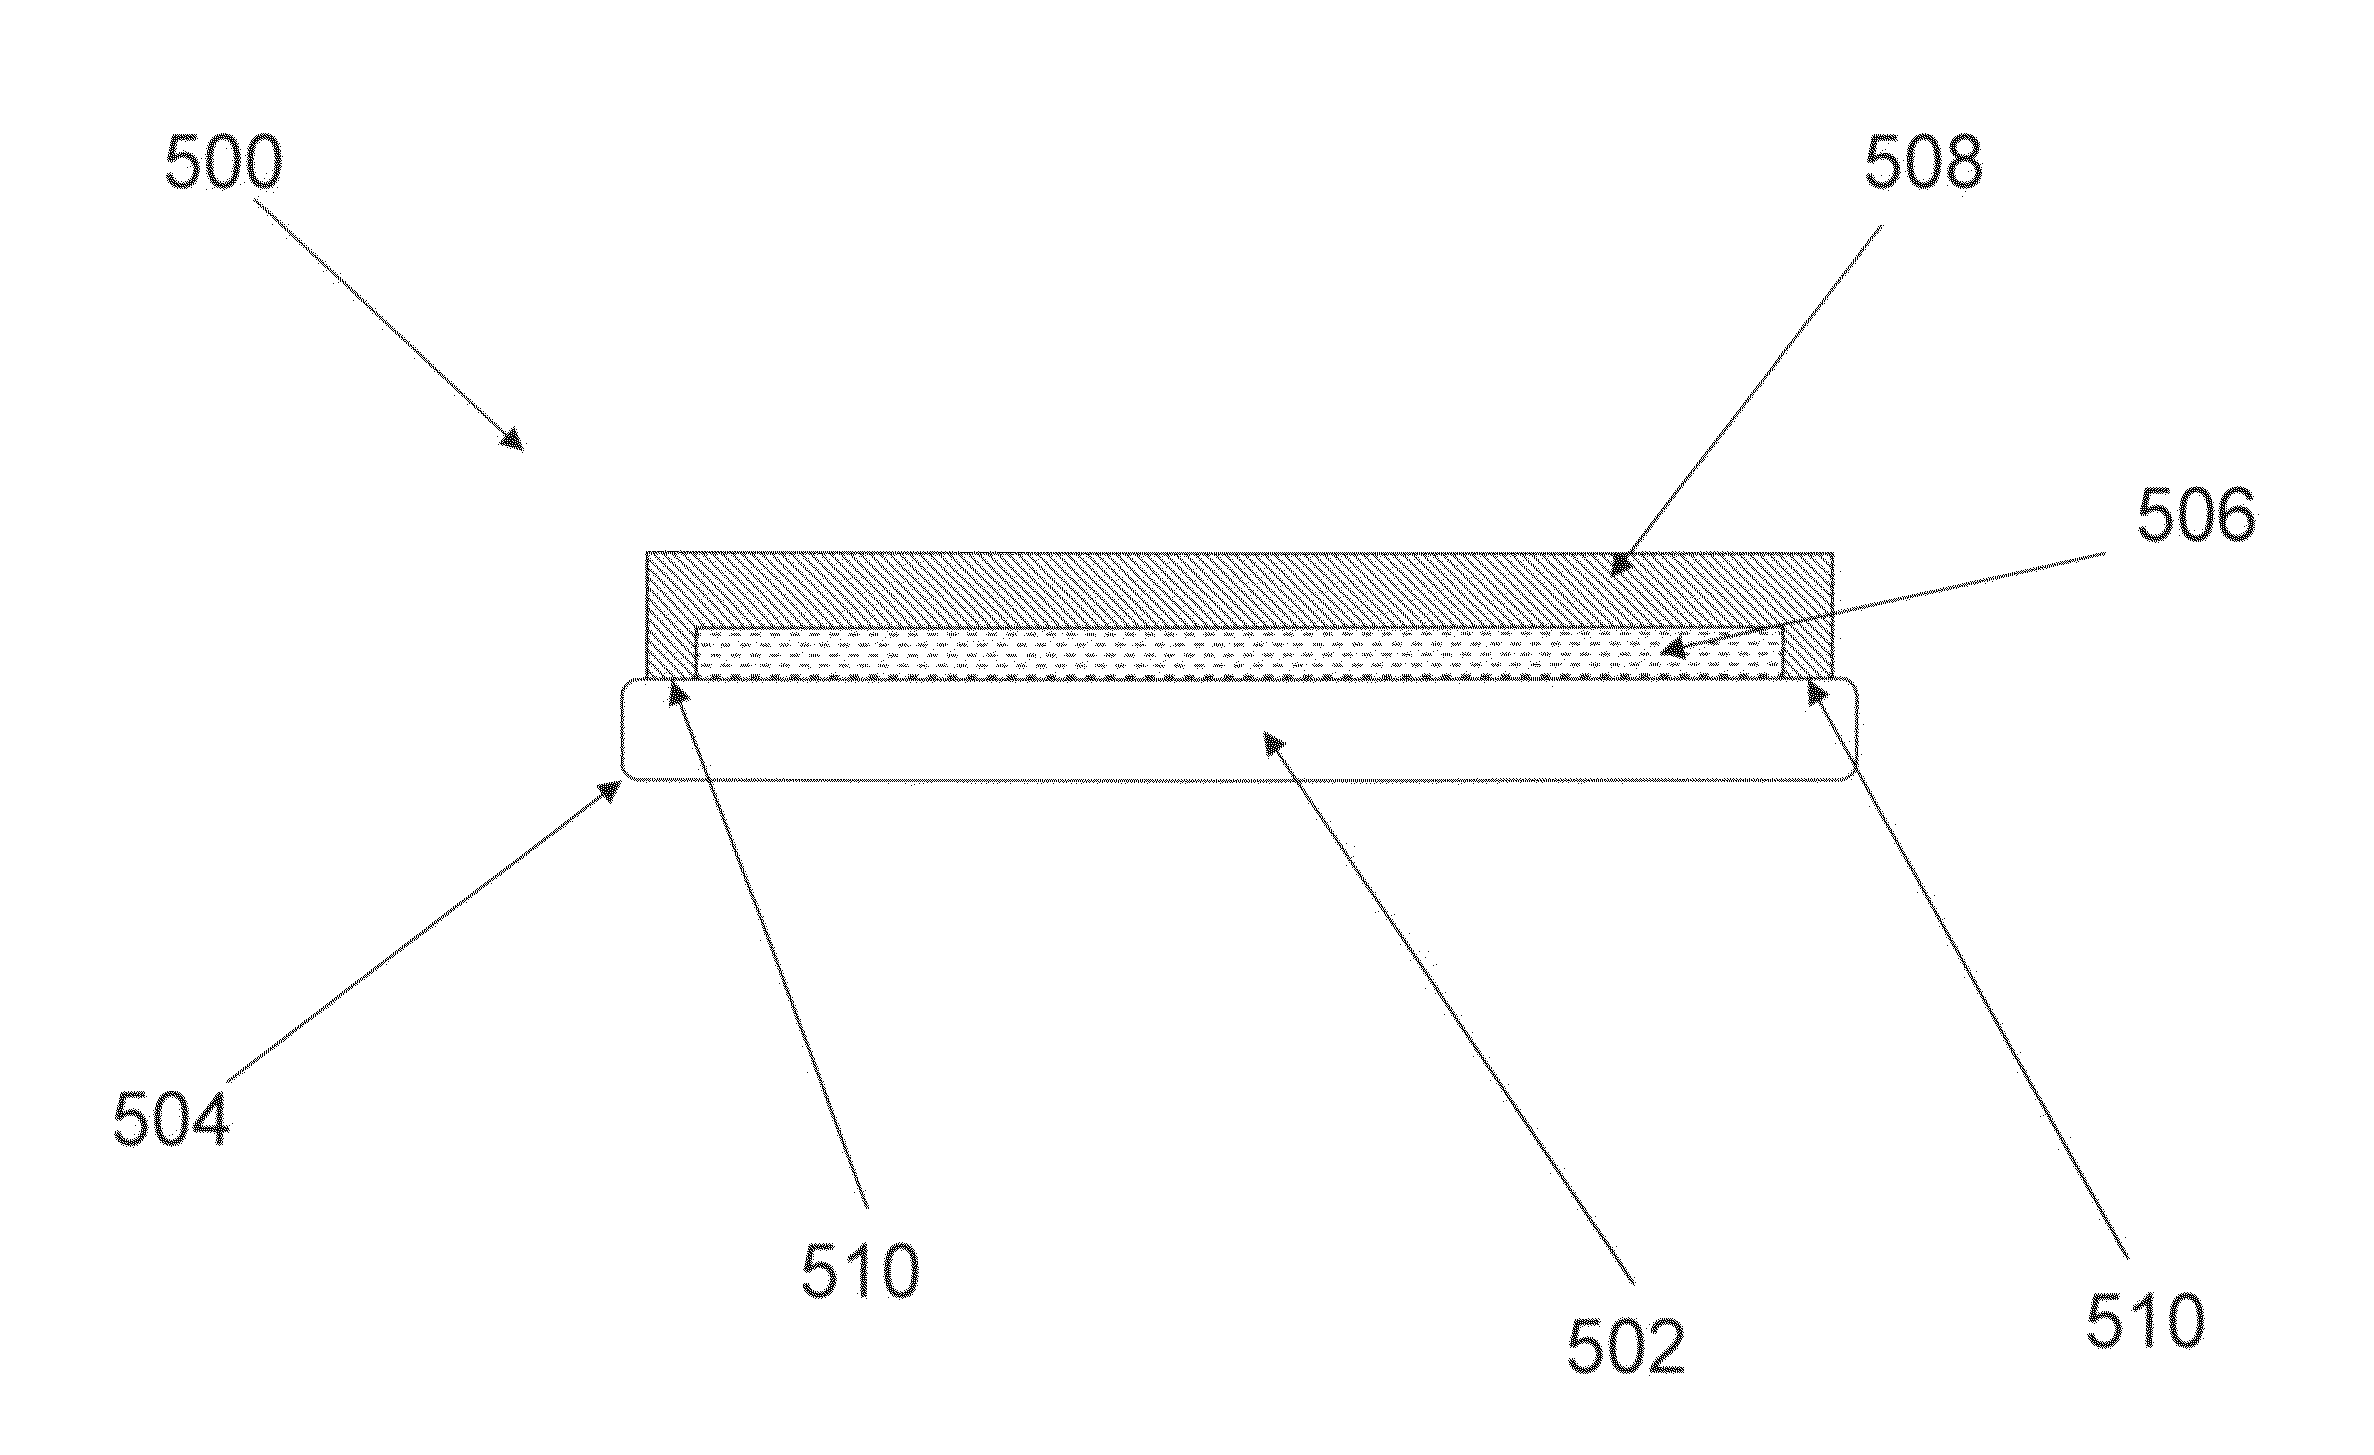 Secondary reflector panel (SRP) with heat-treatable coating for concentrated solar power applications, and/or methods of making the same